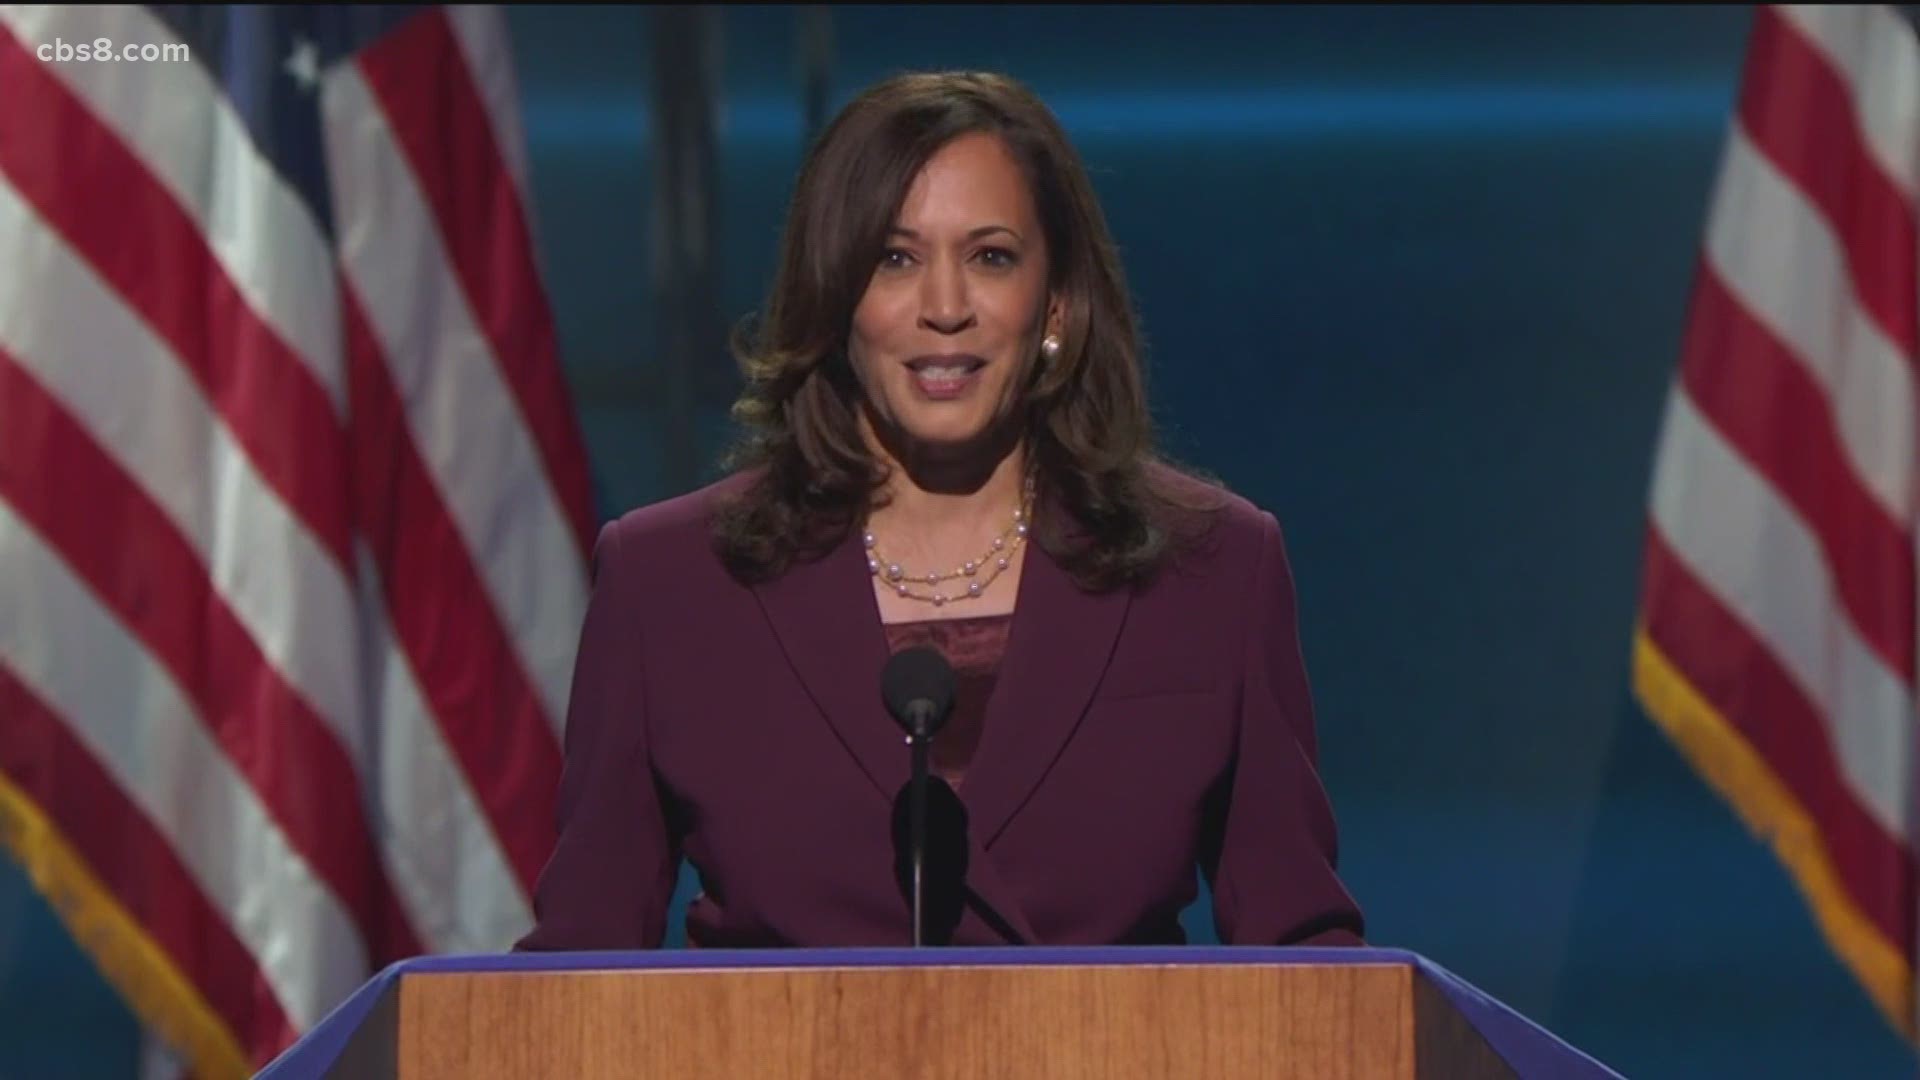 Wednesday night, millions of Americans witnessed California-born Kamala Harris become the first woman of color to accept a major political party's VP nomination.